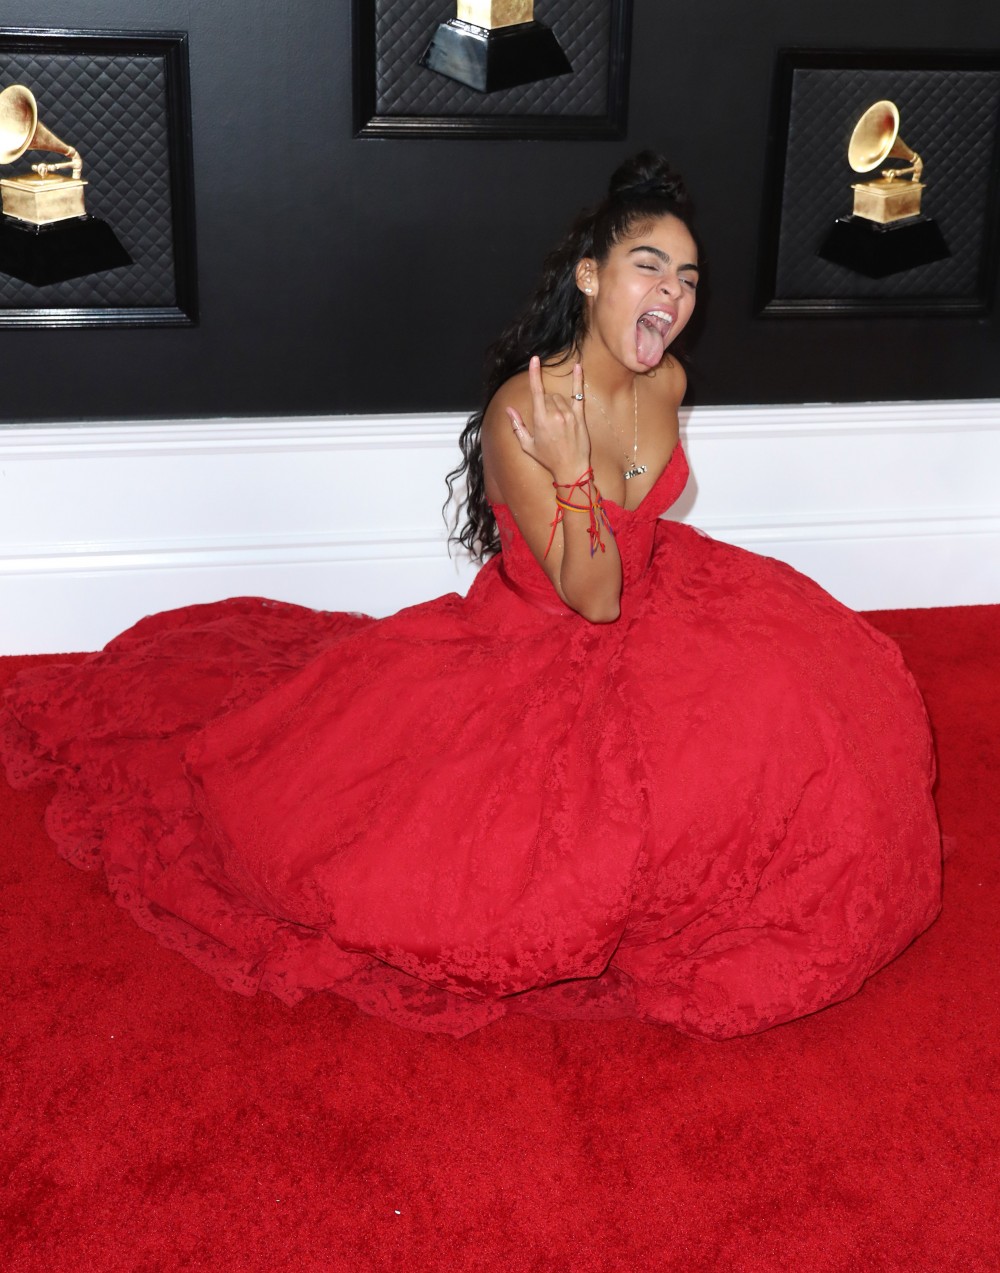 Jessie Reyez arrives at the 62nd Annual GRAMMY Awards held at Staples Center on January 26, 2020 in Los Angeles, California, United States.